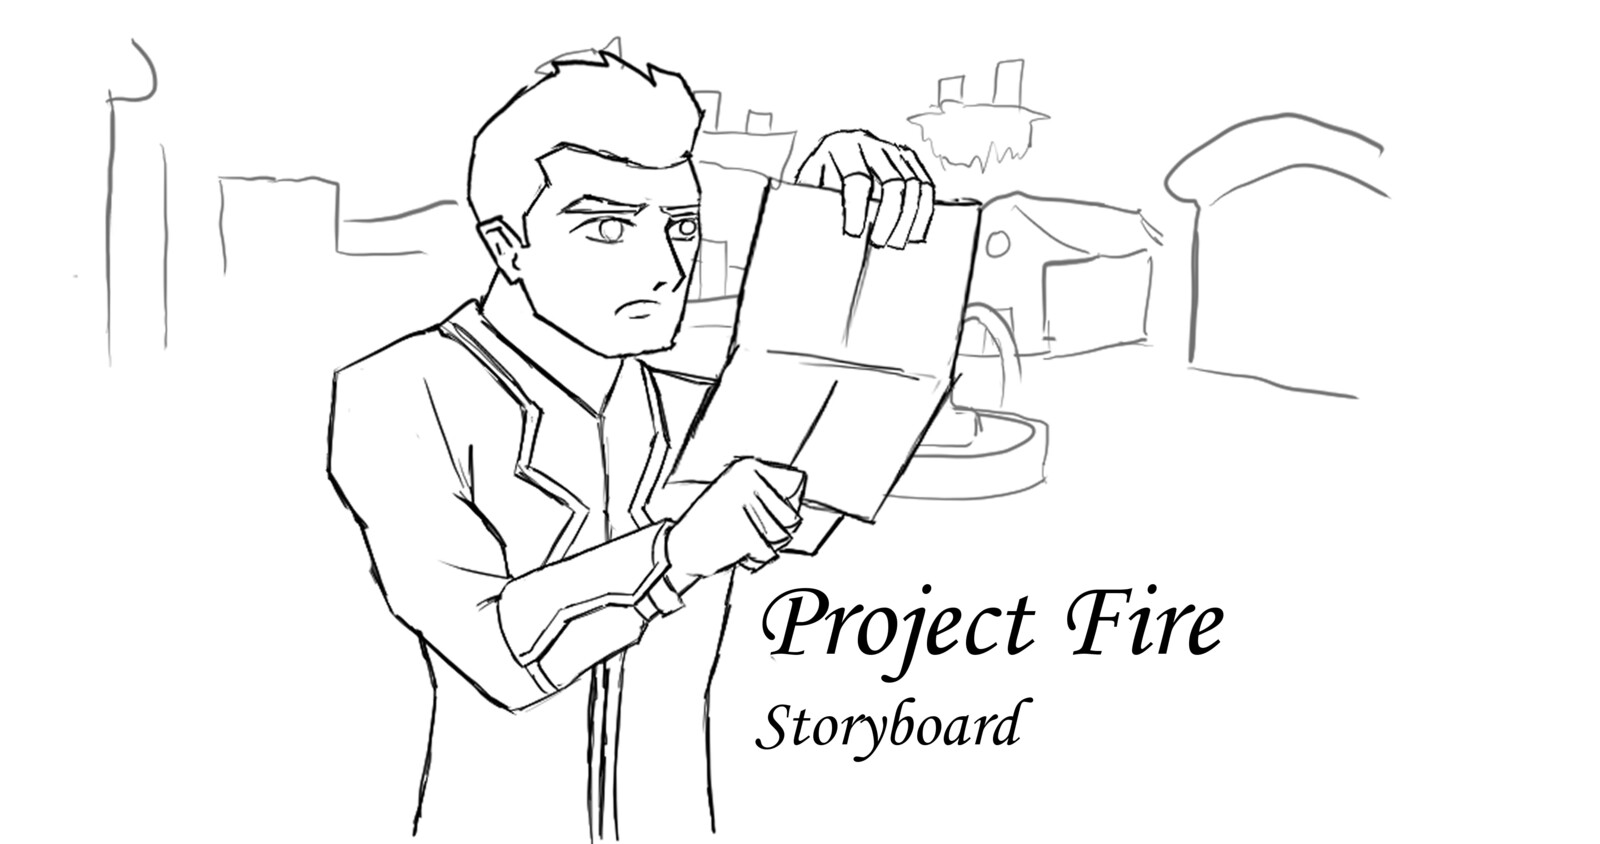 Project Fire - Storyboard Page 1